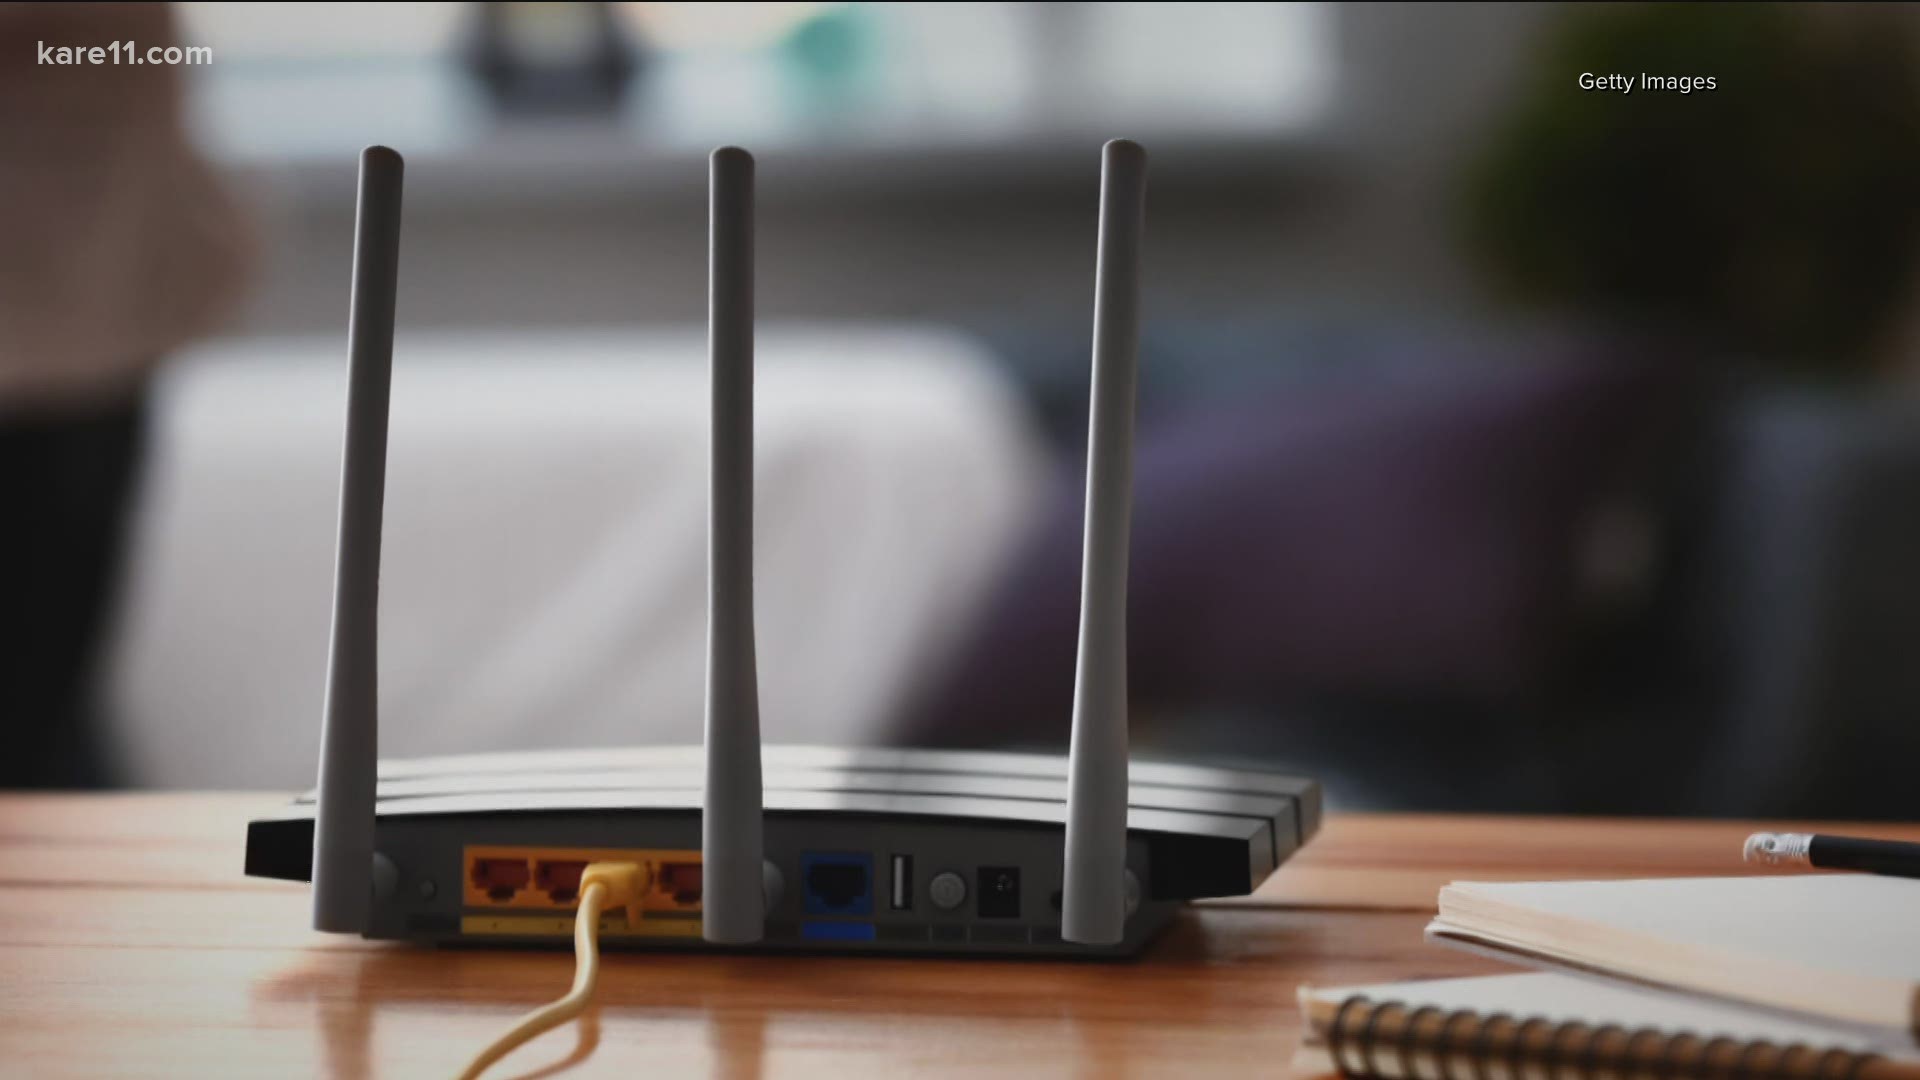 Nearly everyone is working from home right now and no one feels it more than your WiFi signal. Here's some tips to give it a boost.